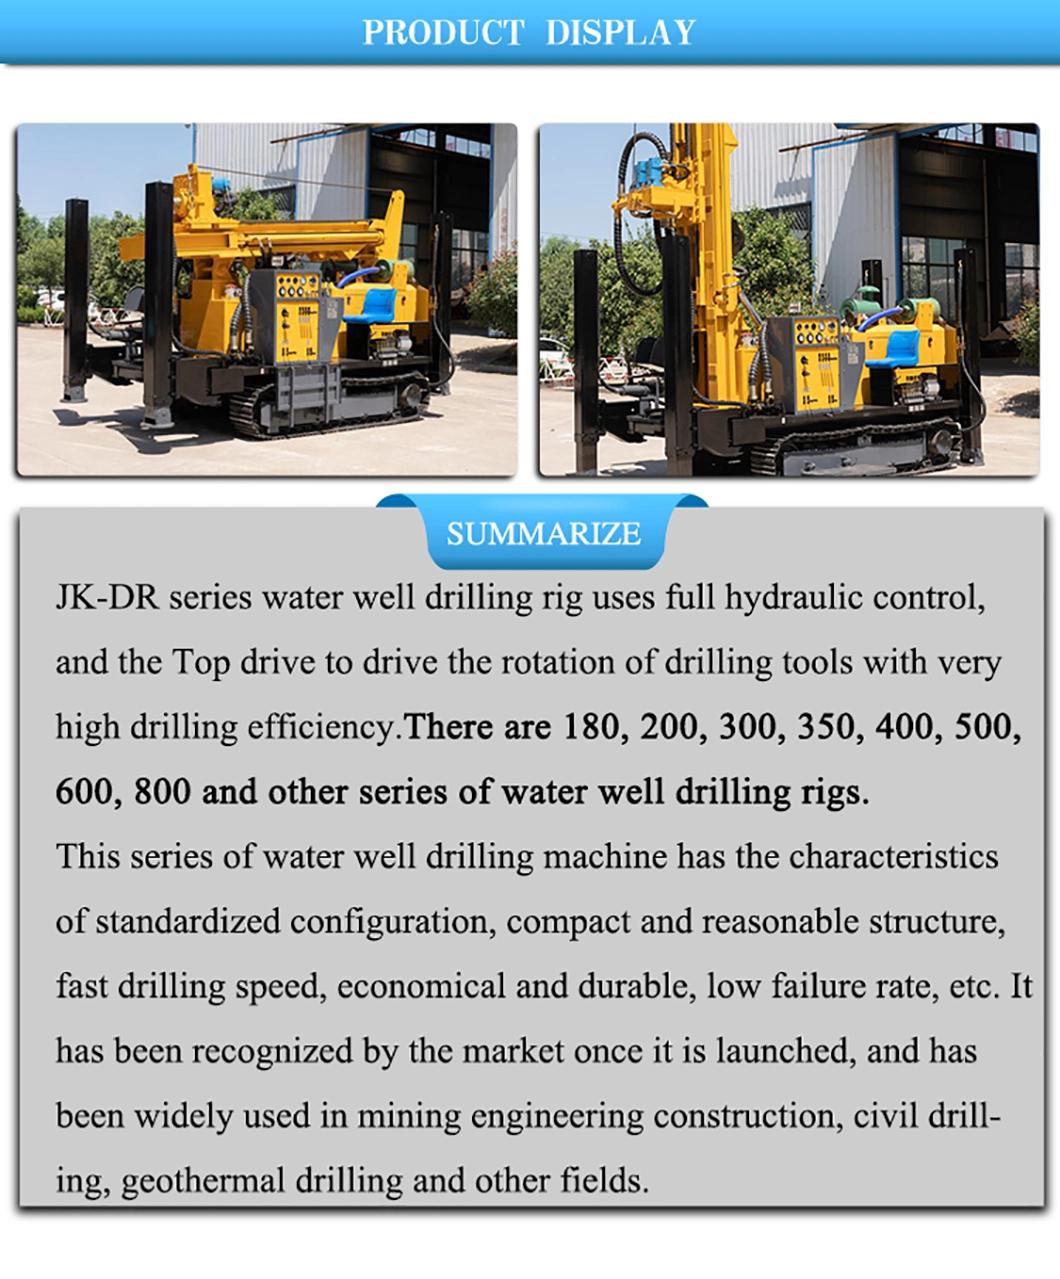 Jk-Dr 300 300 Meter Water Well Drilling Rig for Sale